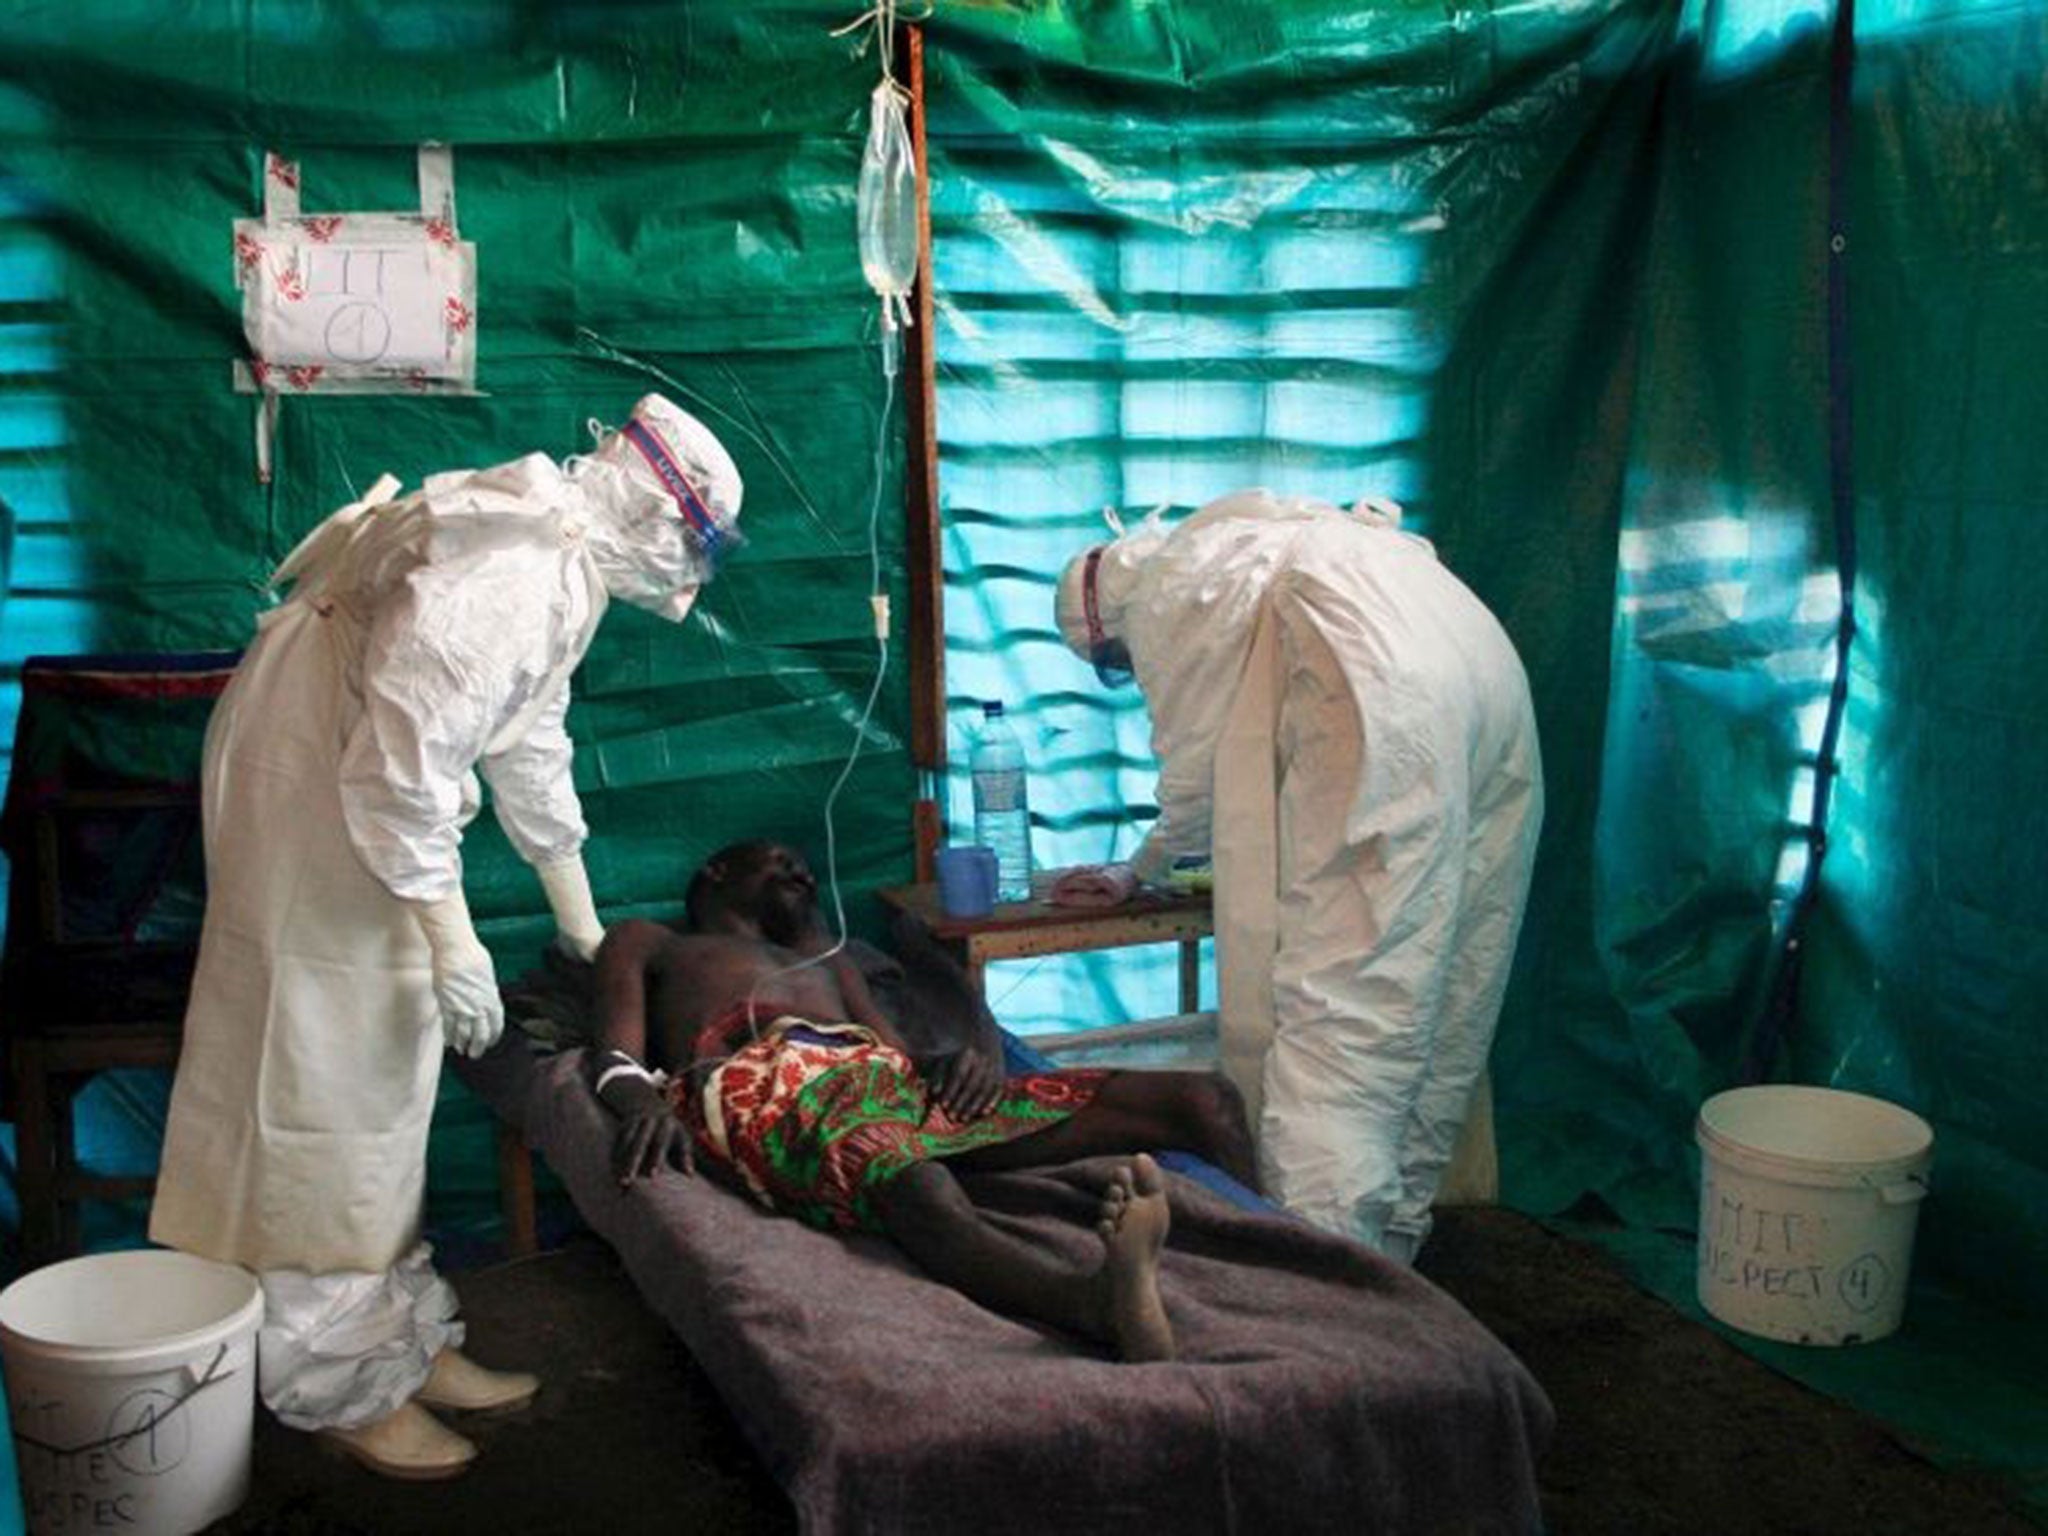 Doctors from Médecins Sans Frontières treat a patient suspected to have the Ebola virus in 2007 in Congo